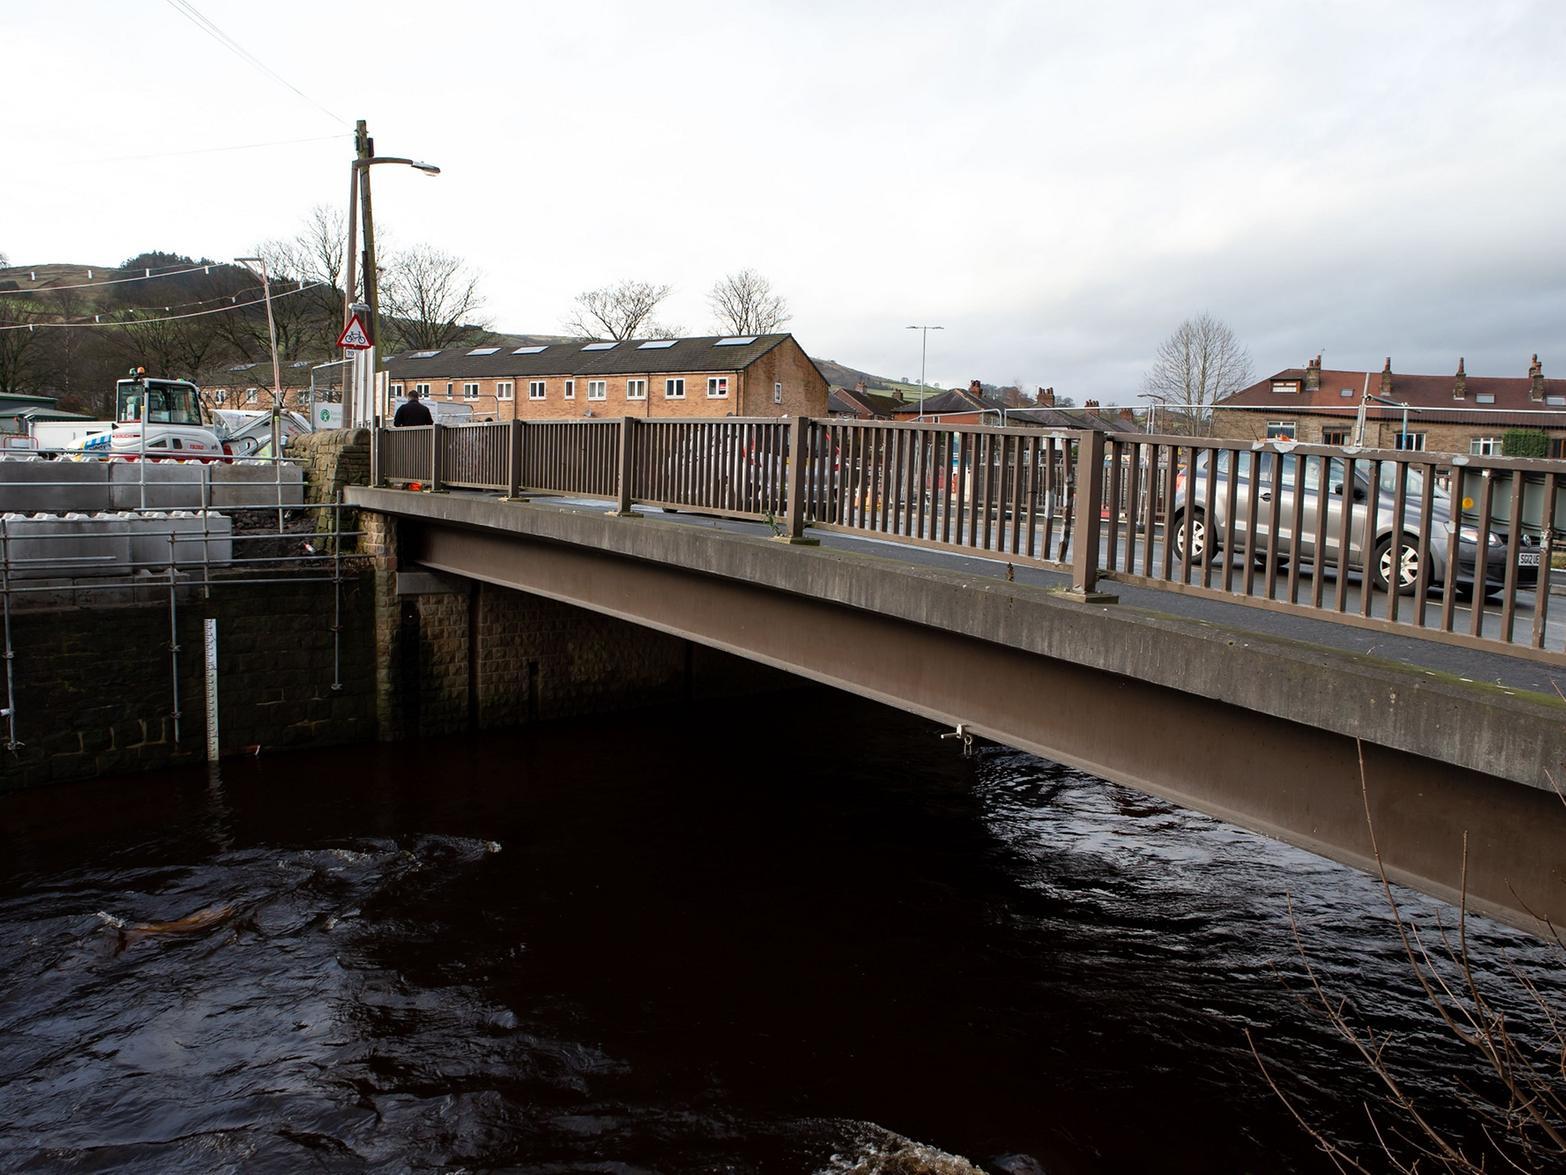 The new bridge has an improved alignment with the River Calder.